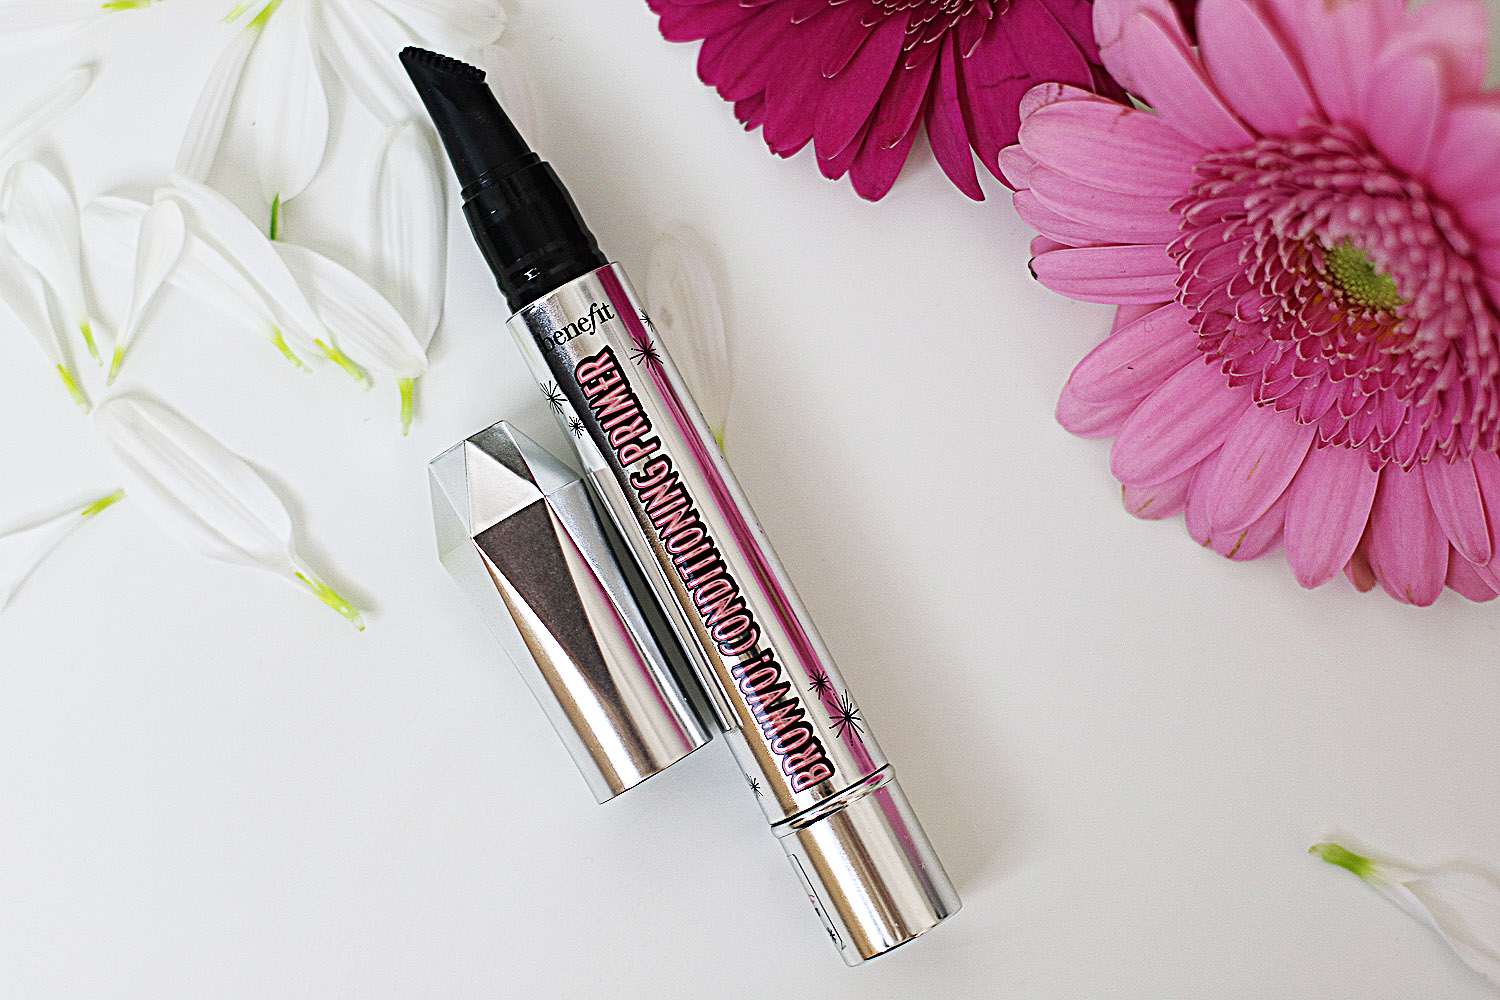 Benefit-Brows-5 New Benefit EyeBrow Collection Review